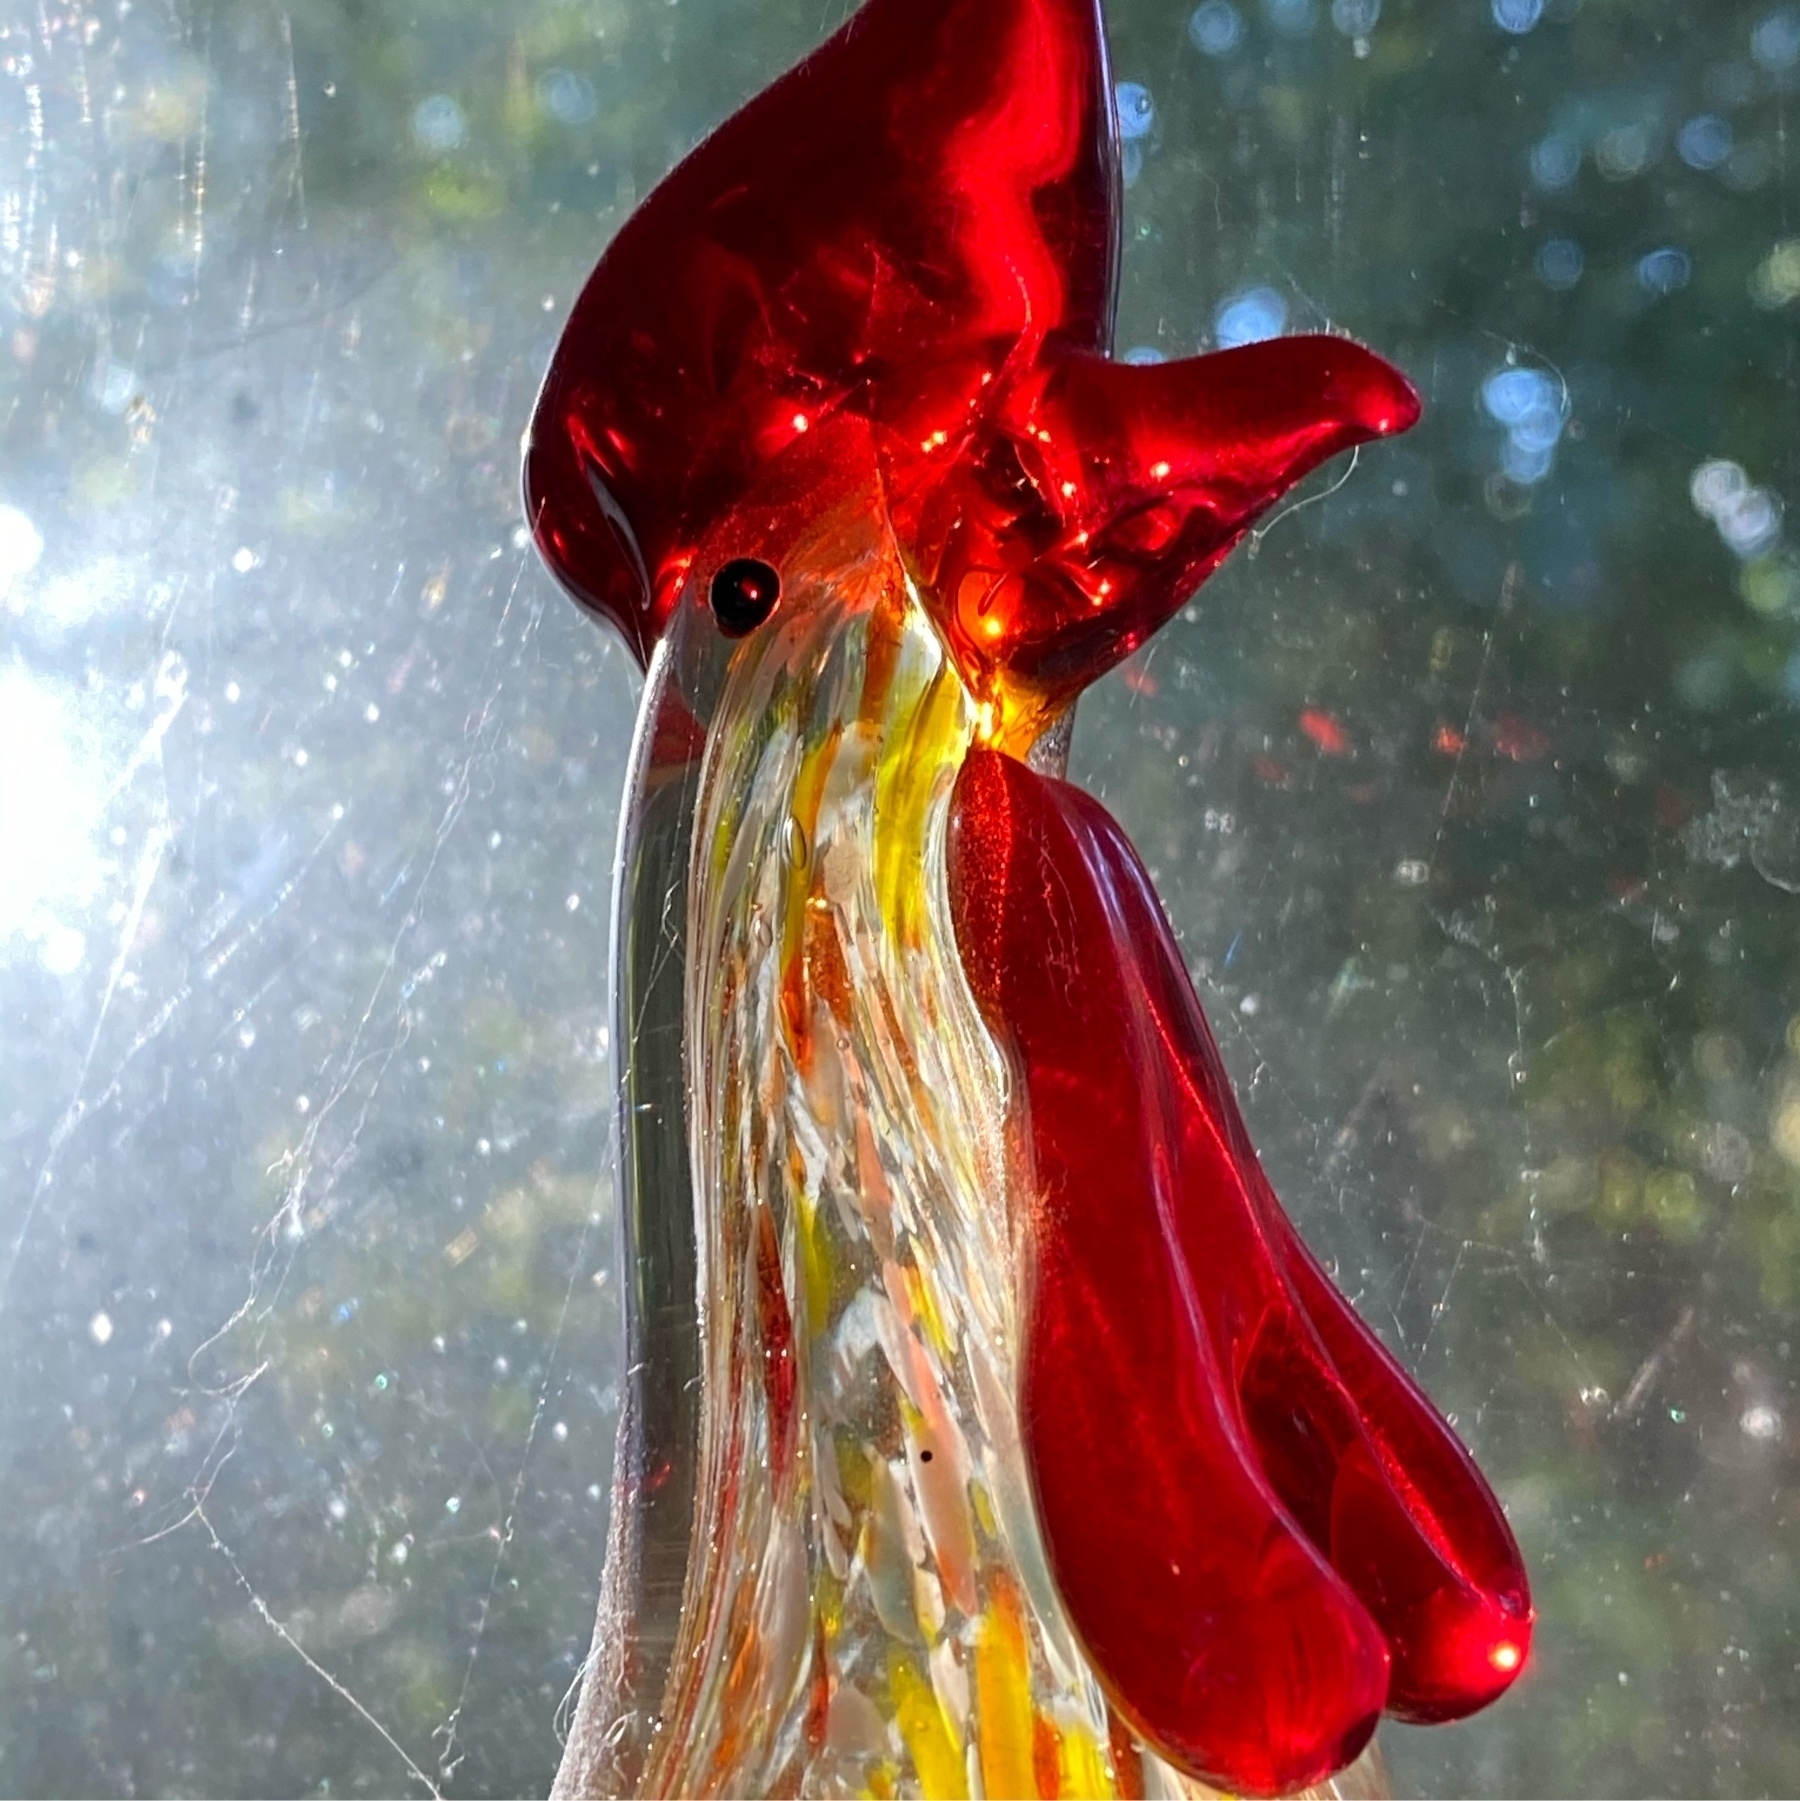 Head of rooster made of glass.